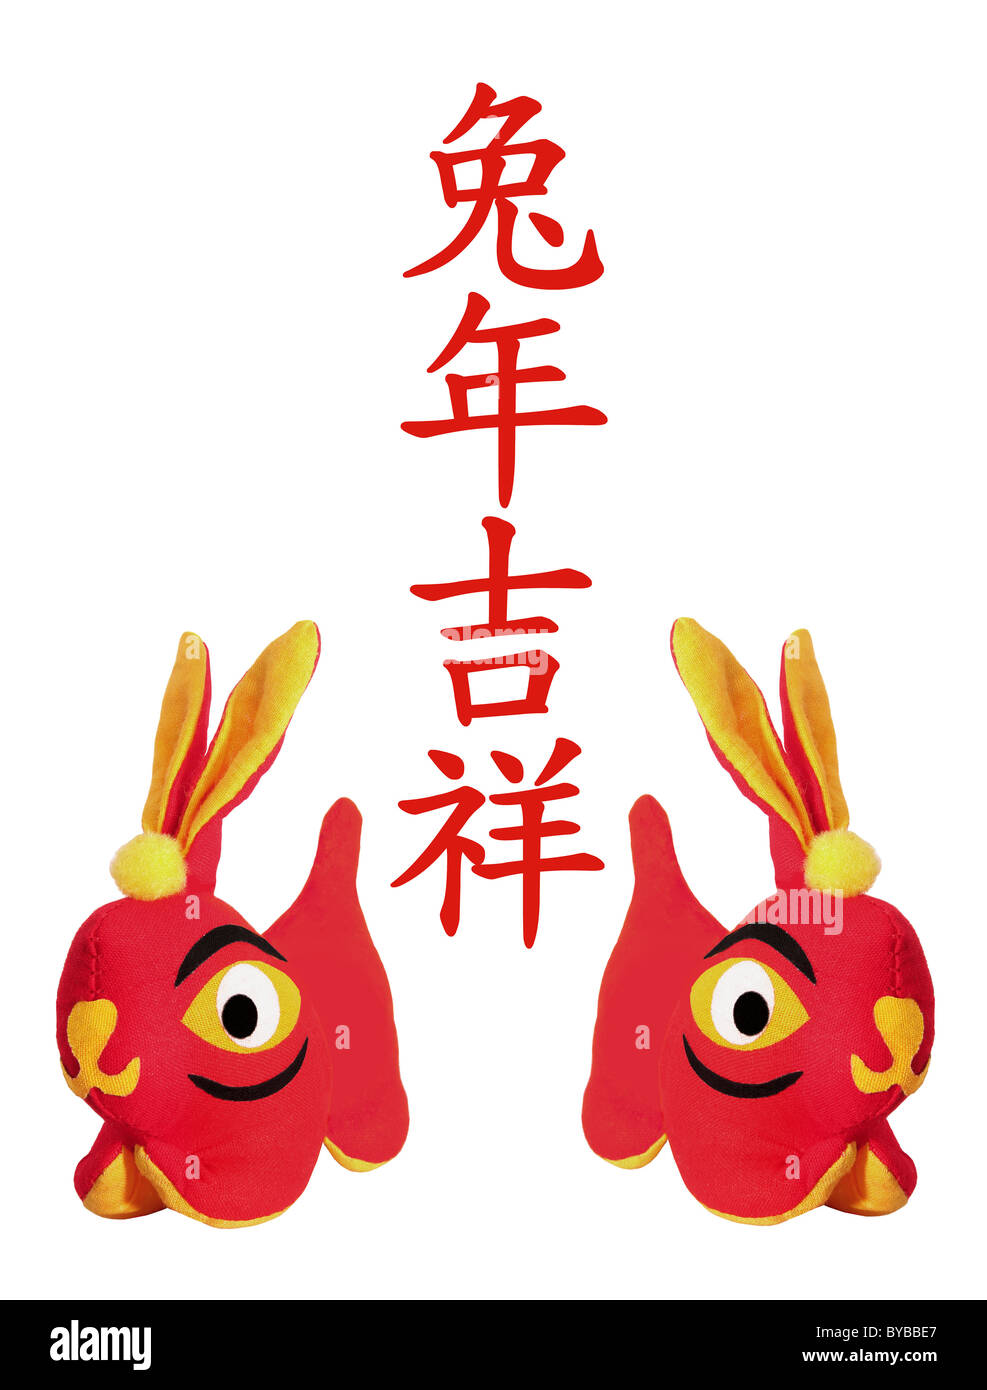 Year of the Rabbit on White Background Stock Photo